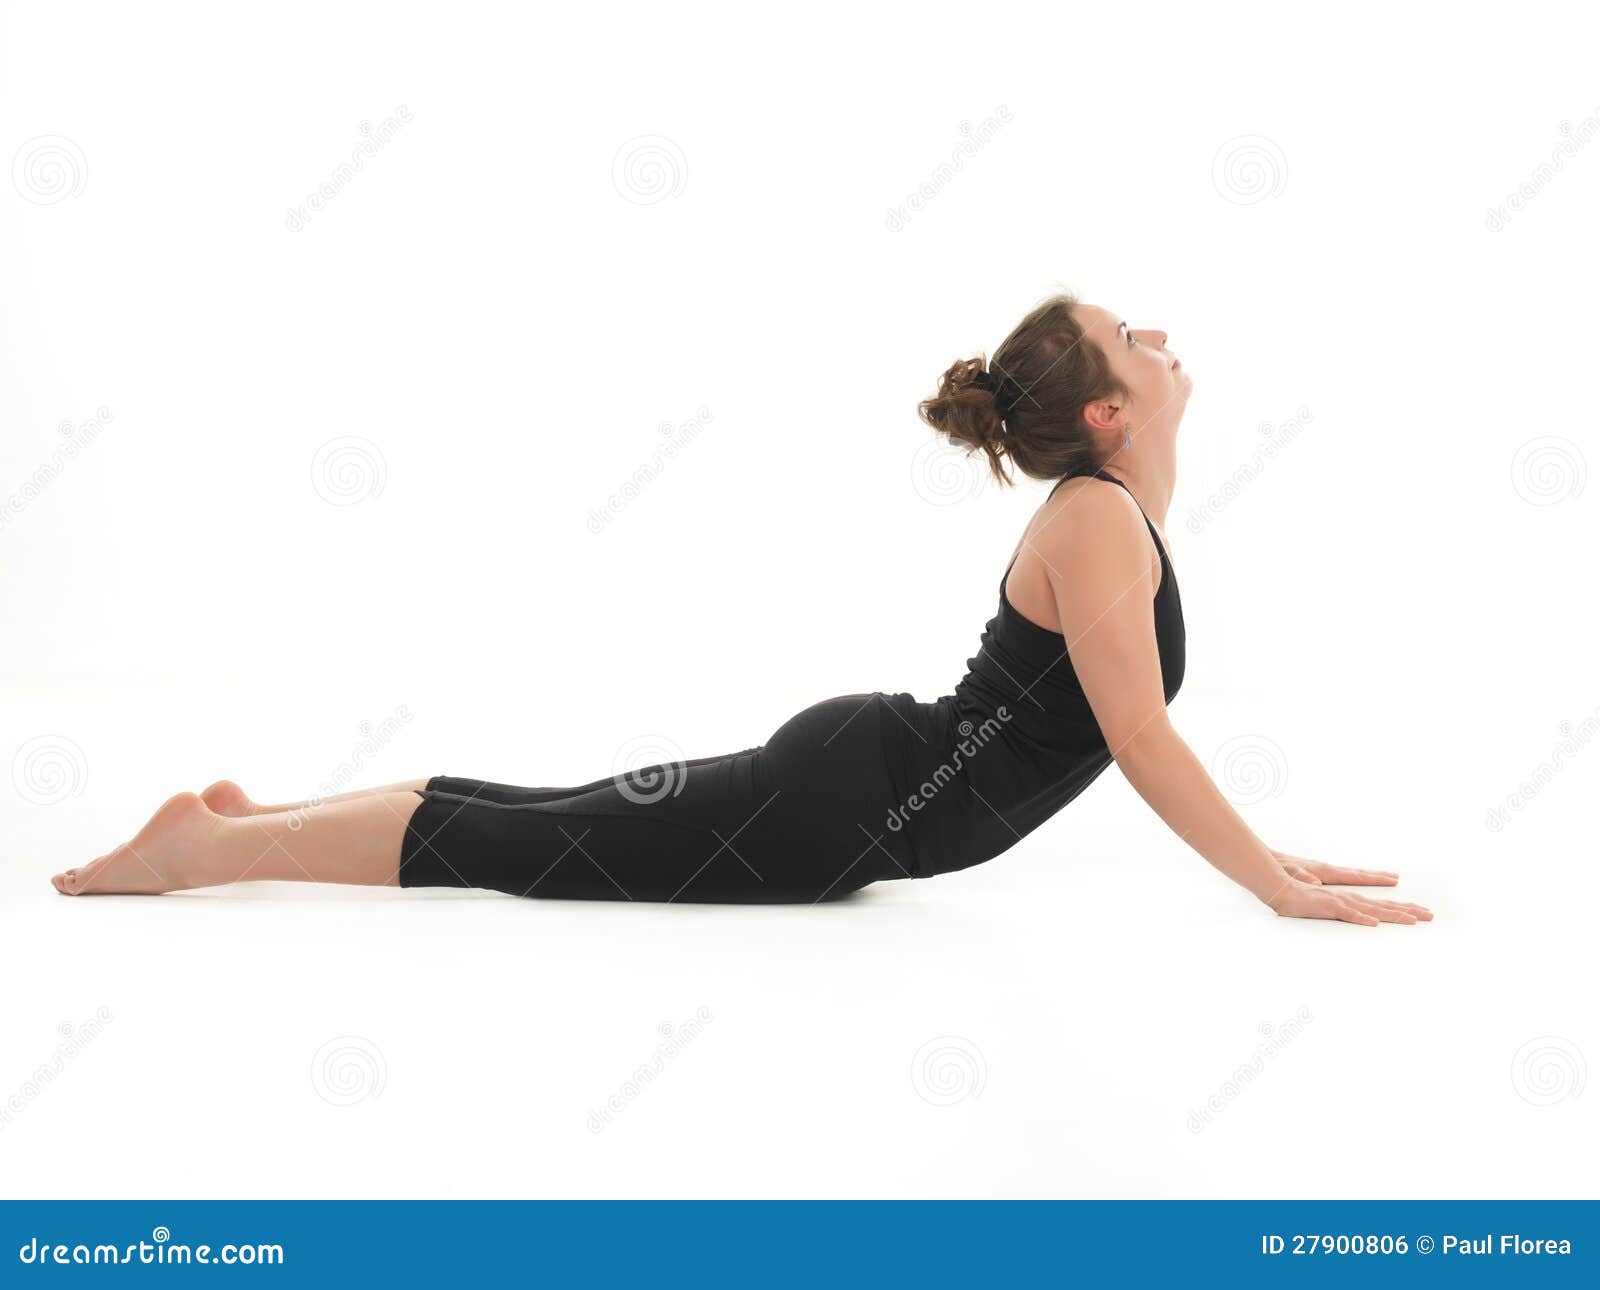 690+ Difficult Yoga Stock Photos, Pictures & Royalty-Free Images - iStock